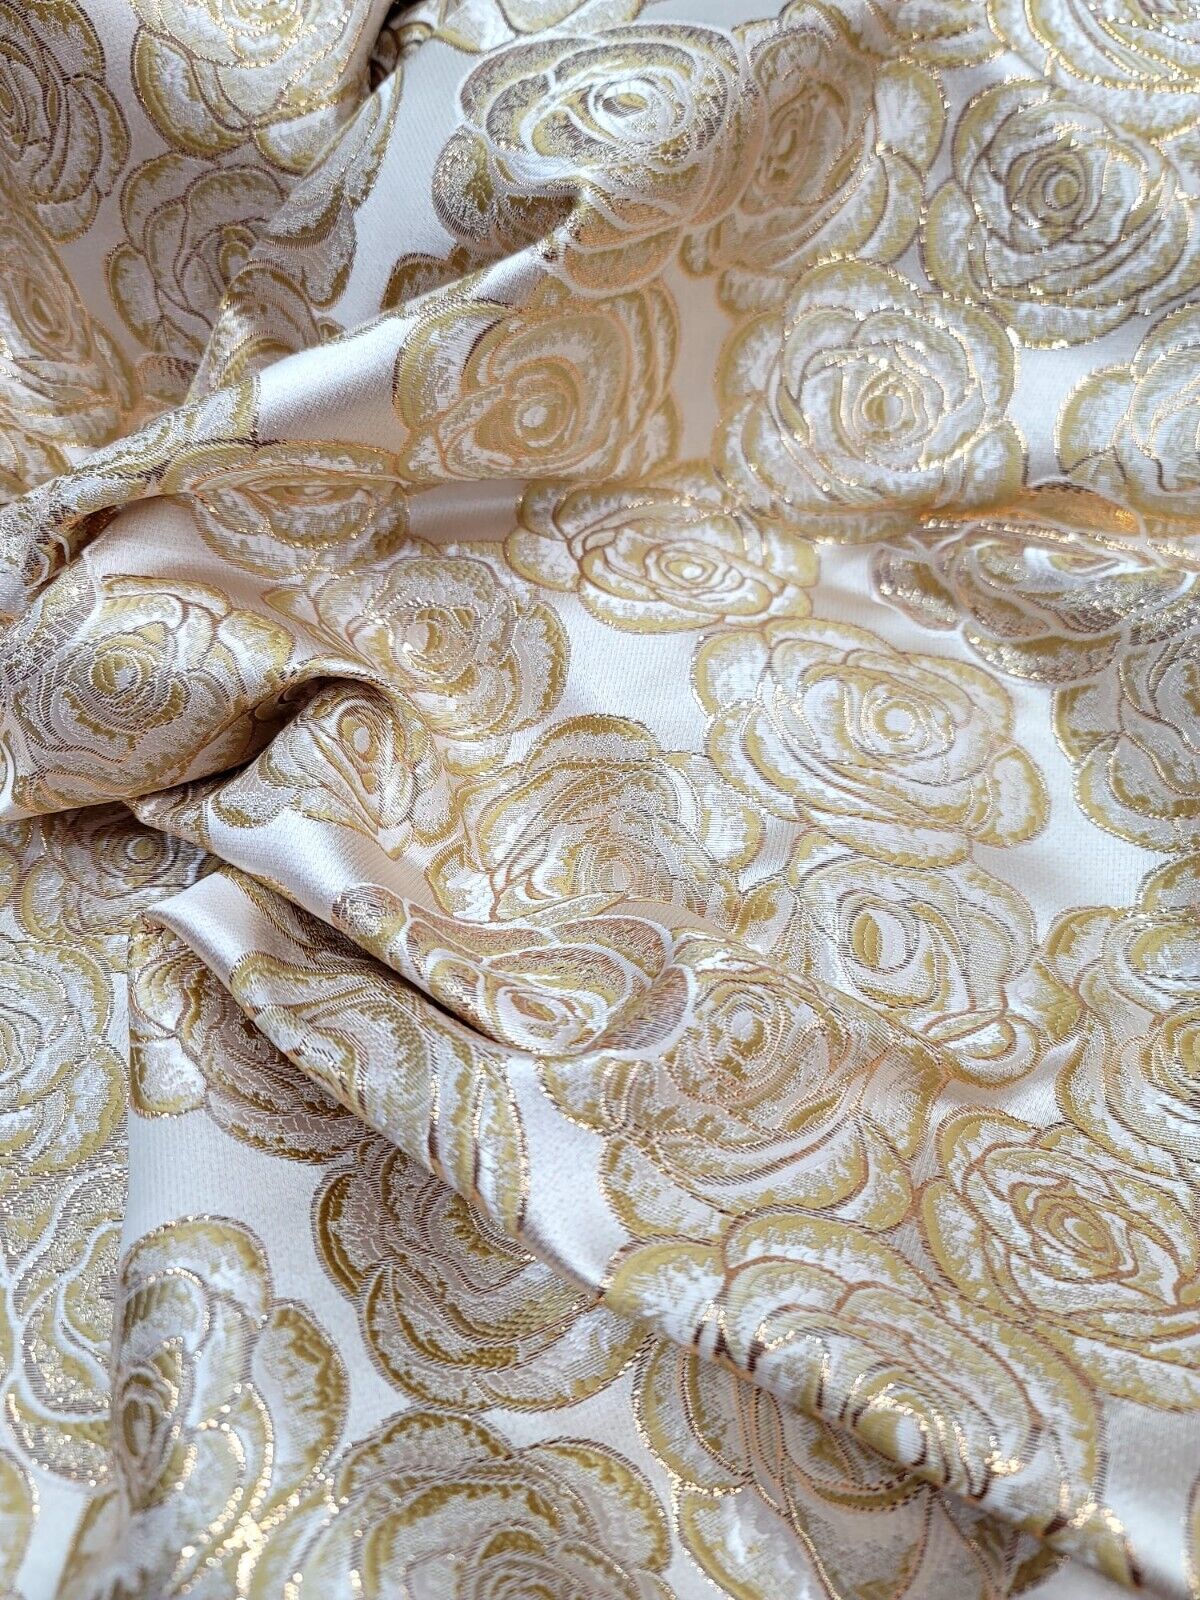 BEIGE GOLD Floral Brocade Fabric (60 in.) Sold By The Yard TEXTURED METALLIC